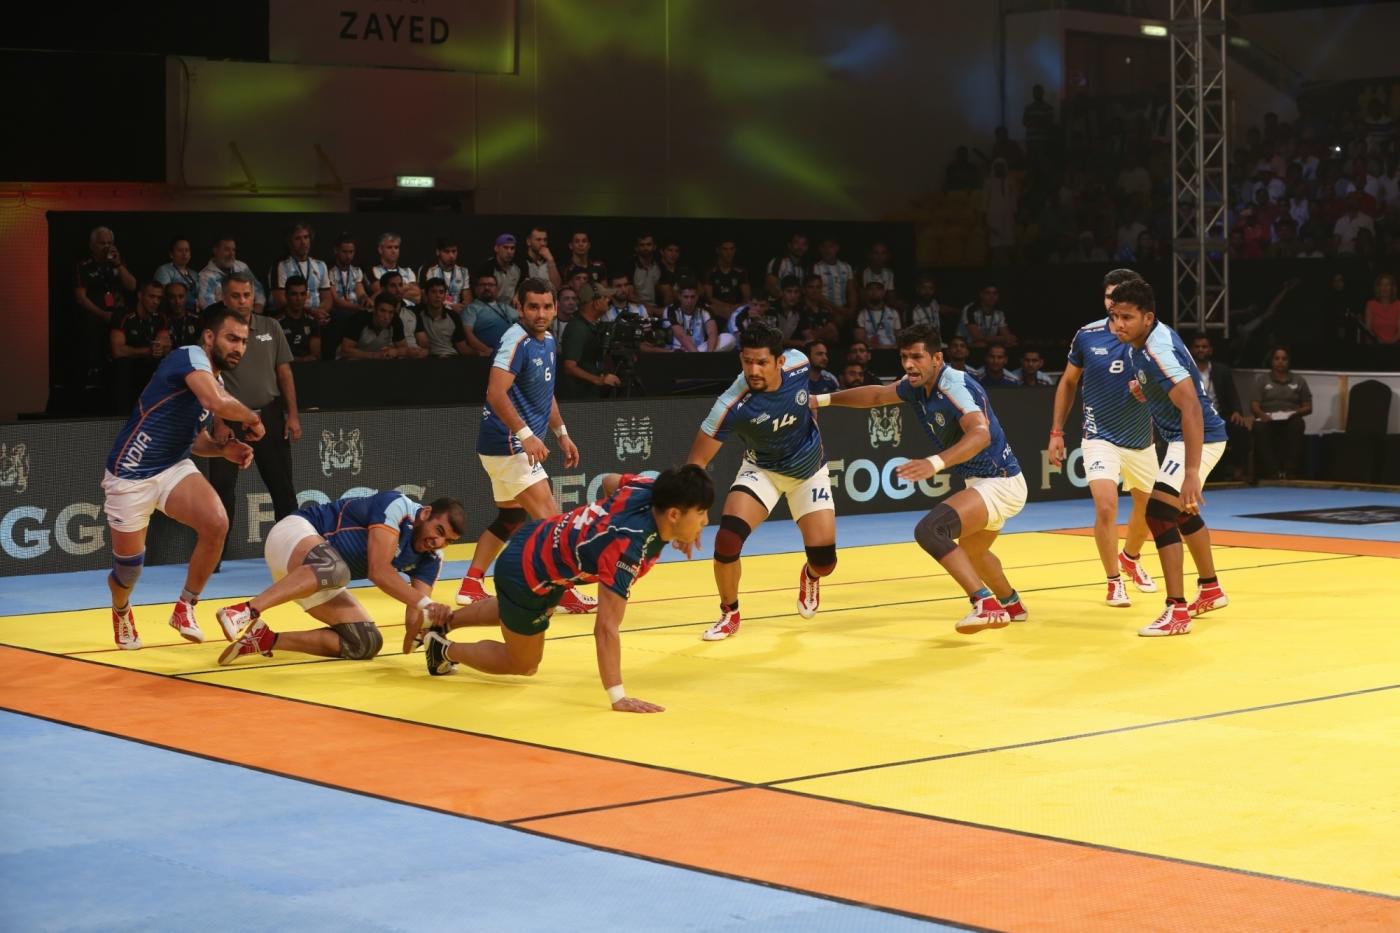 Dubai: Players in action during the second semi final of Kabaddi Masters Dubai between India and South Korea at the Al Wasl Sports Club, in Dubai on June 29, 2018. (Photo: IANS) by .